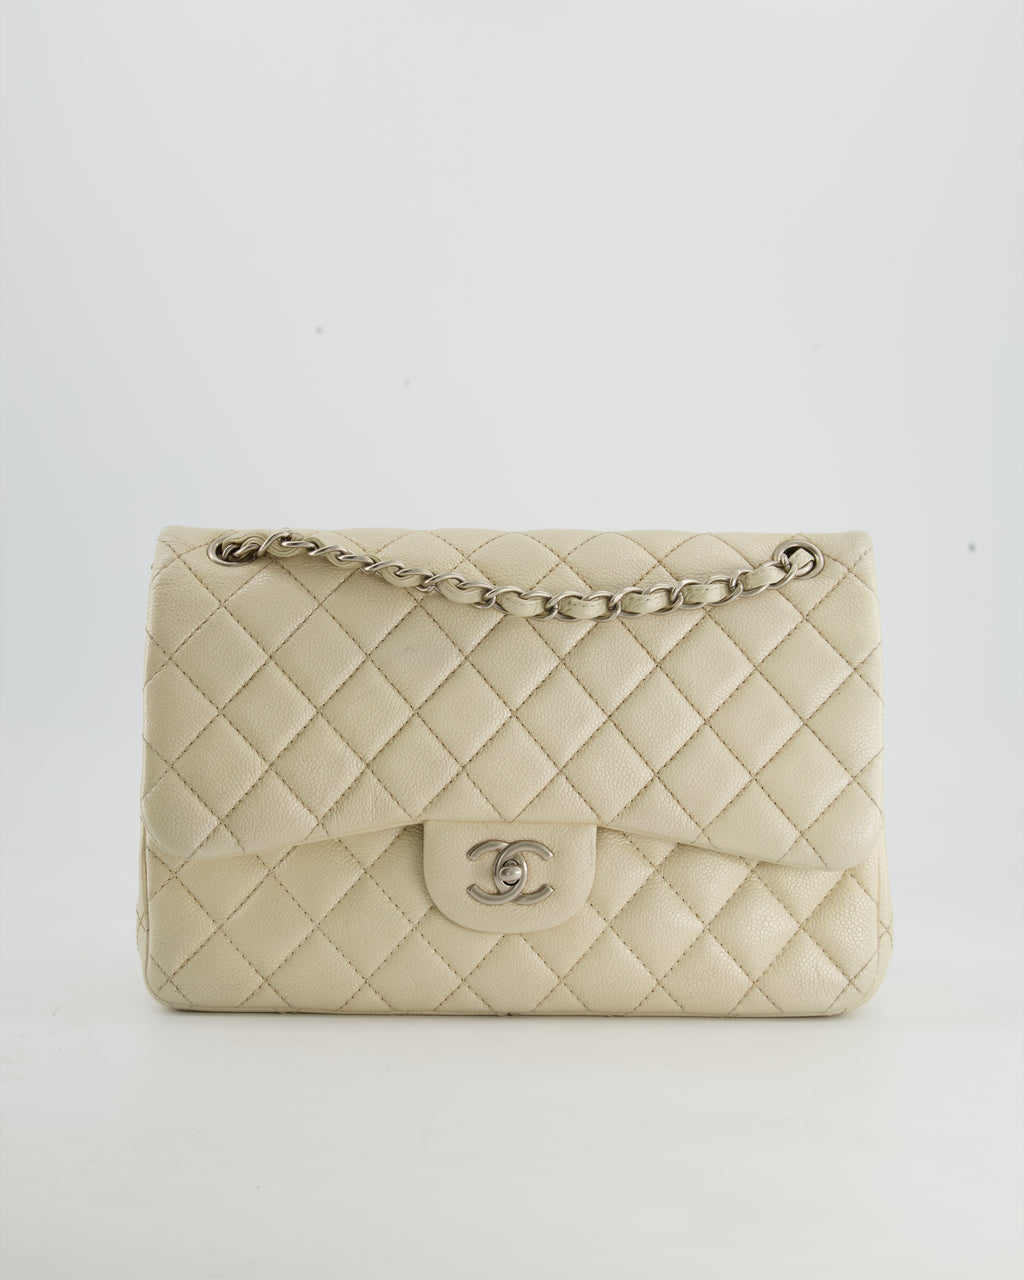 Chanel Pearlescent Ivory Caviar Jumbo Classic Double Flap Bag